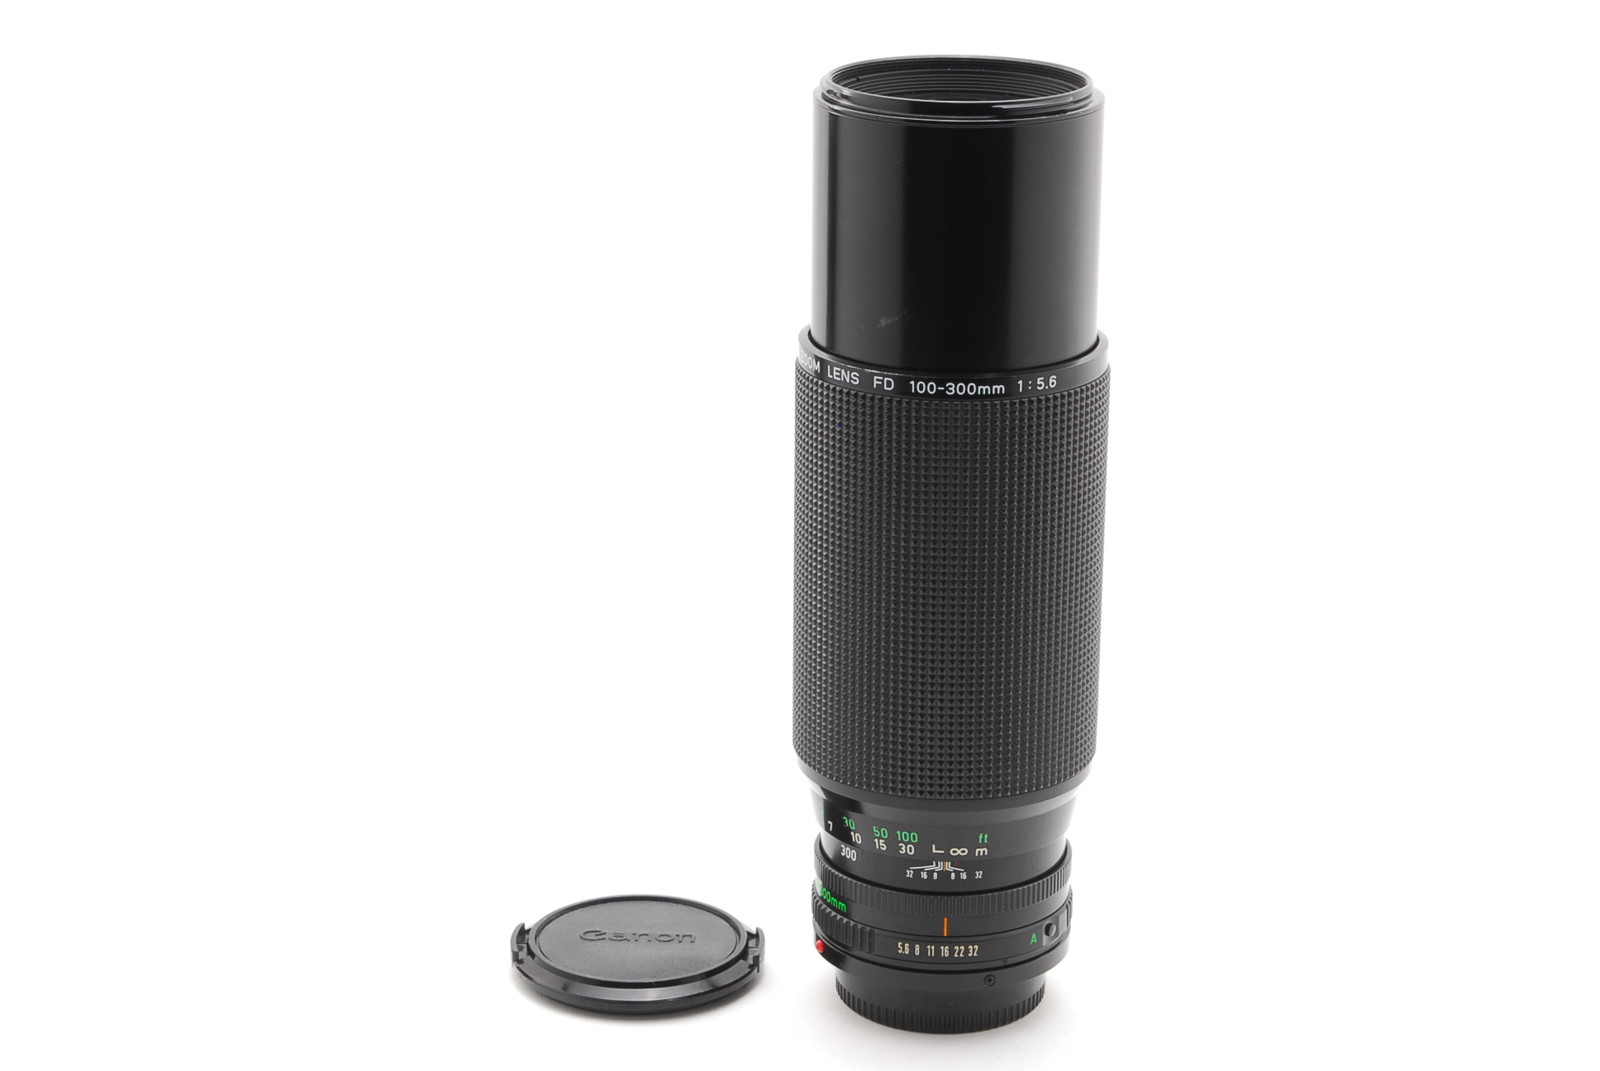 PROMOTION. EXC++++ Canon New FD NFD 100-300mm f/5.6 Manual Lens, Front Cap, Rear Cap from Japan